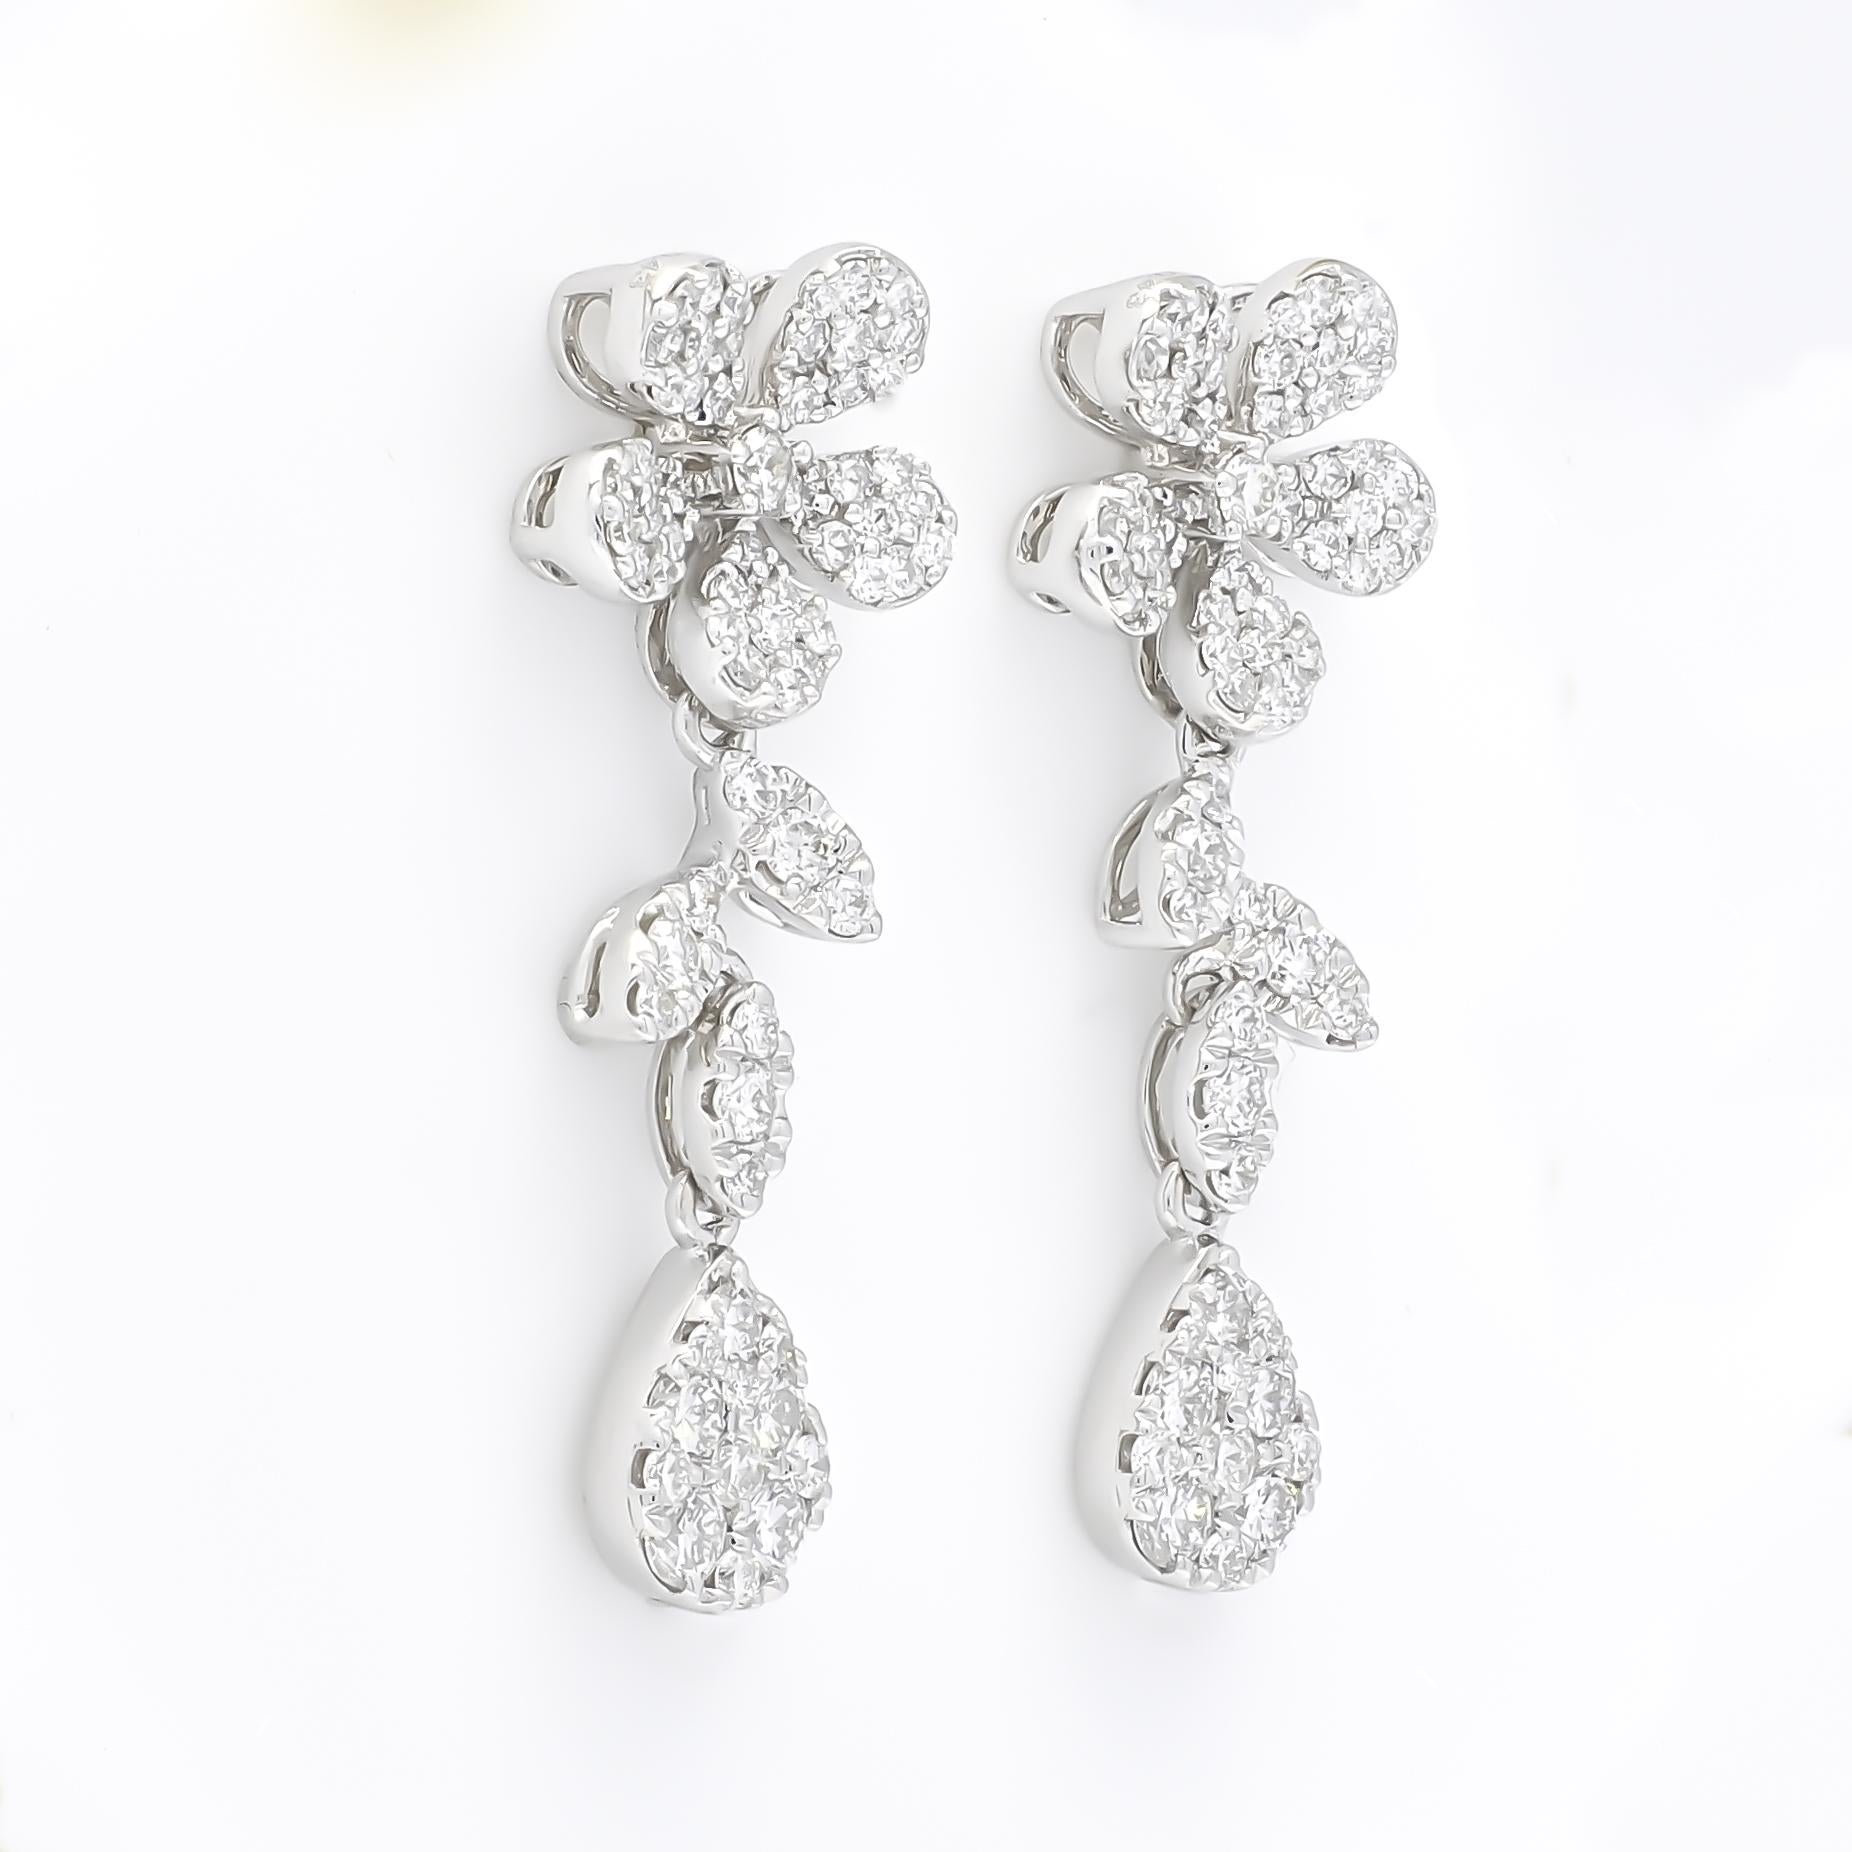 Be Dazzled by these flower clustered earrings set in 18KT White Gold. Fabulously floral.

Look fabulously floral in this sparkling beauty of these round-shape diamond elongated cluster drop earrings set in 18k white gold. It's all about the glam